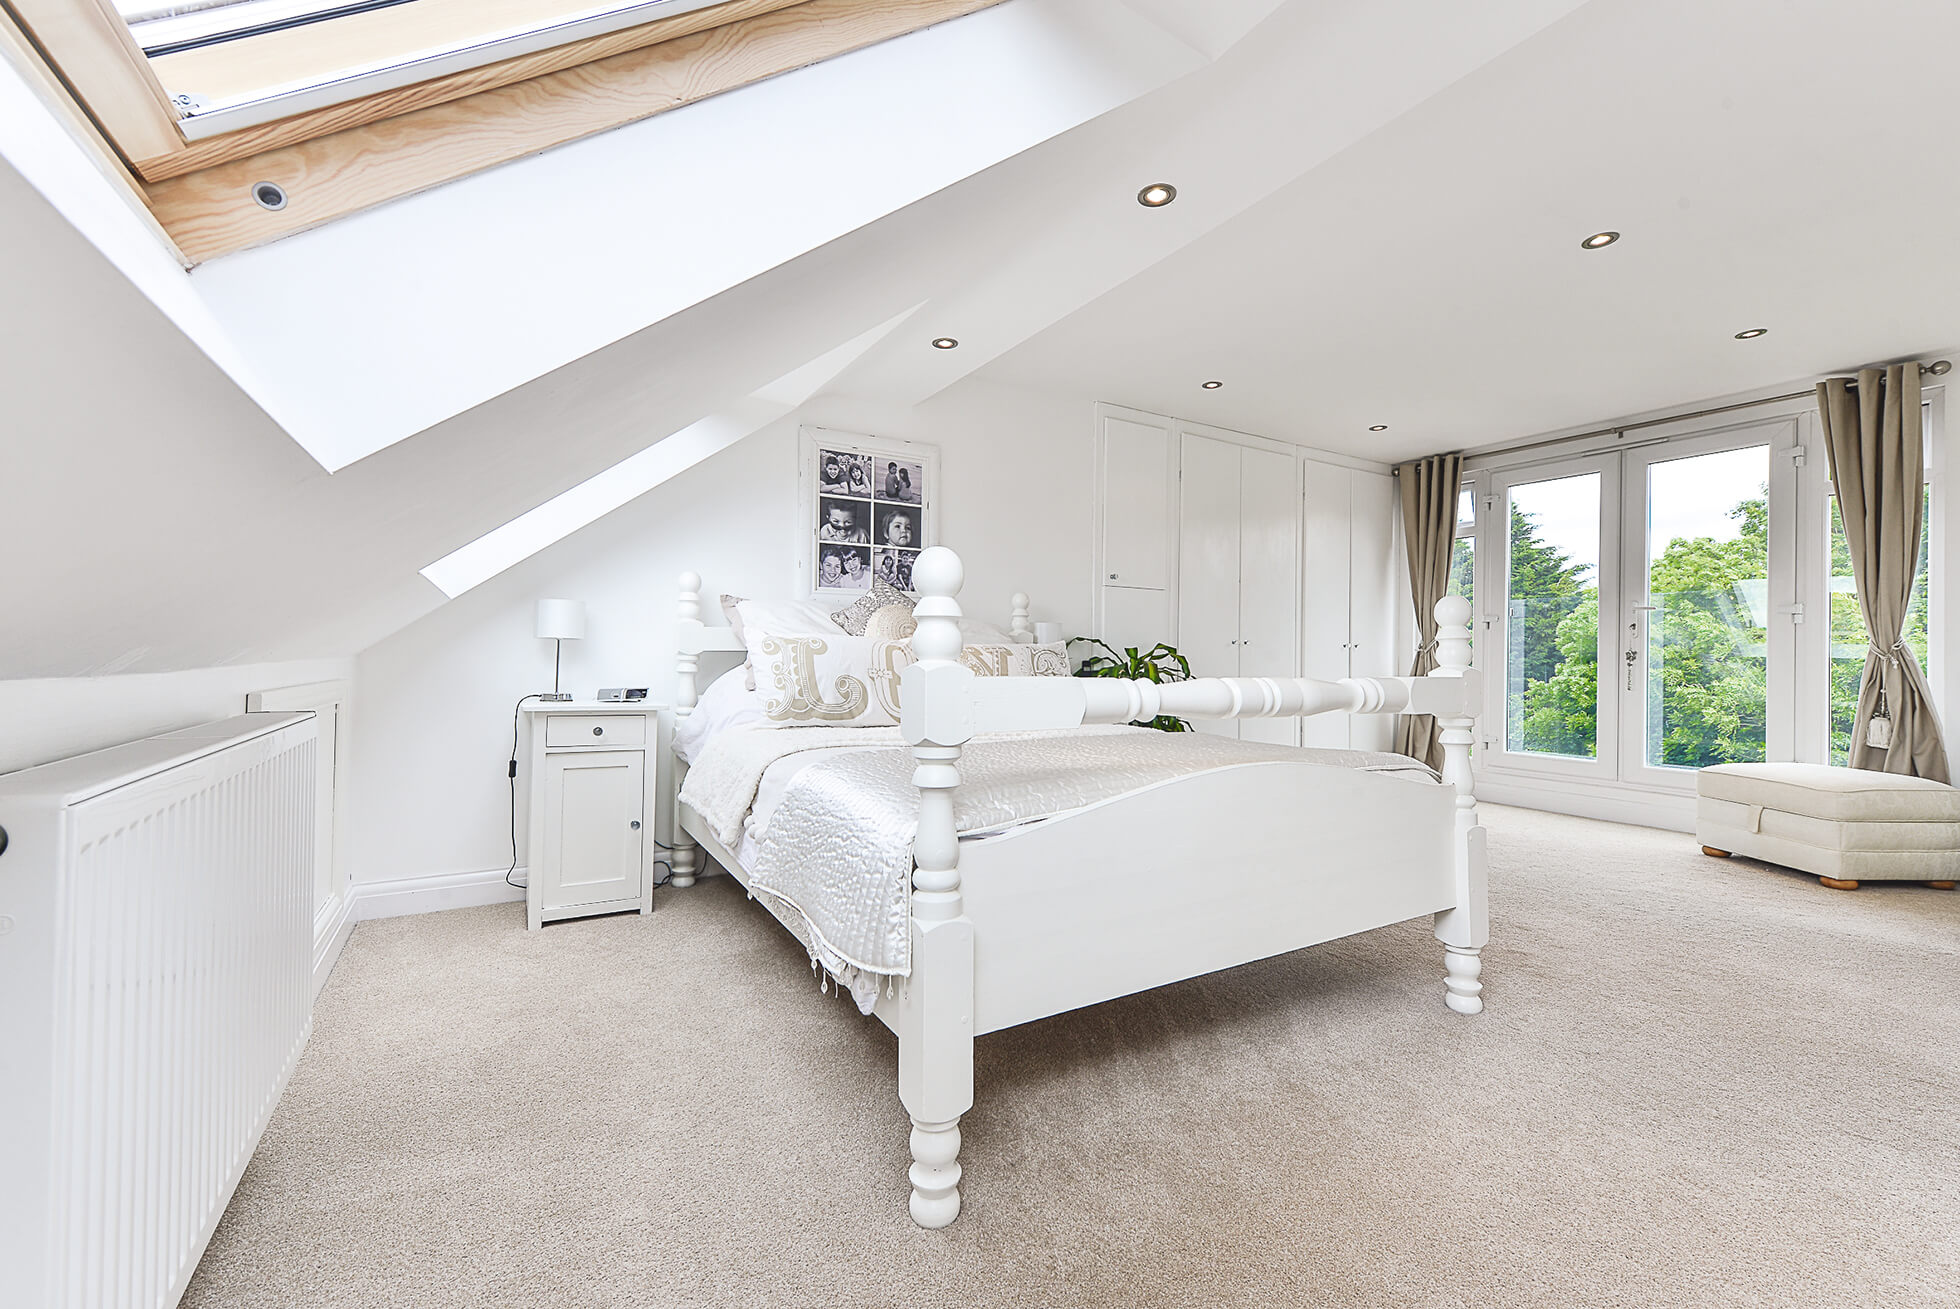 Do you have a question about converting your Loft in Knebworth? Here are the most popular questions asked by our clients.